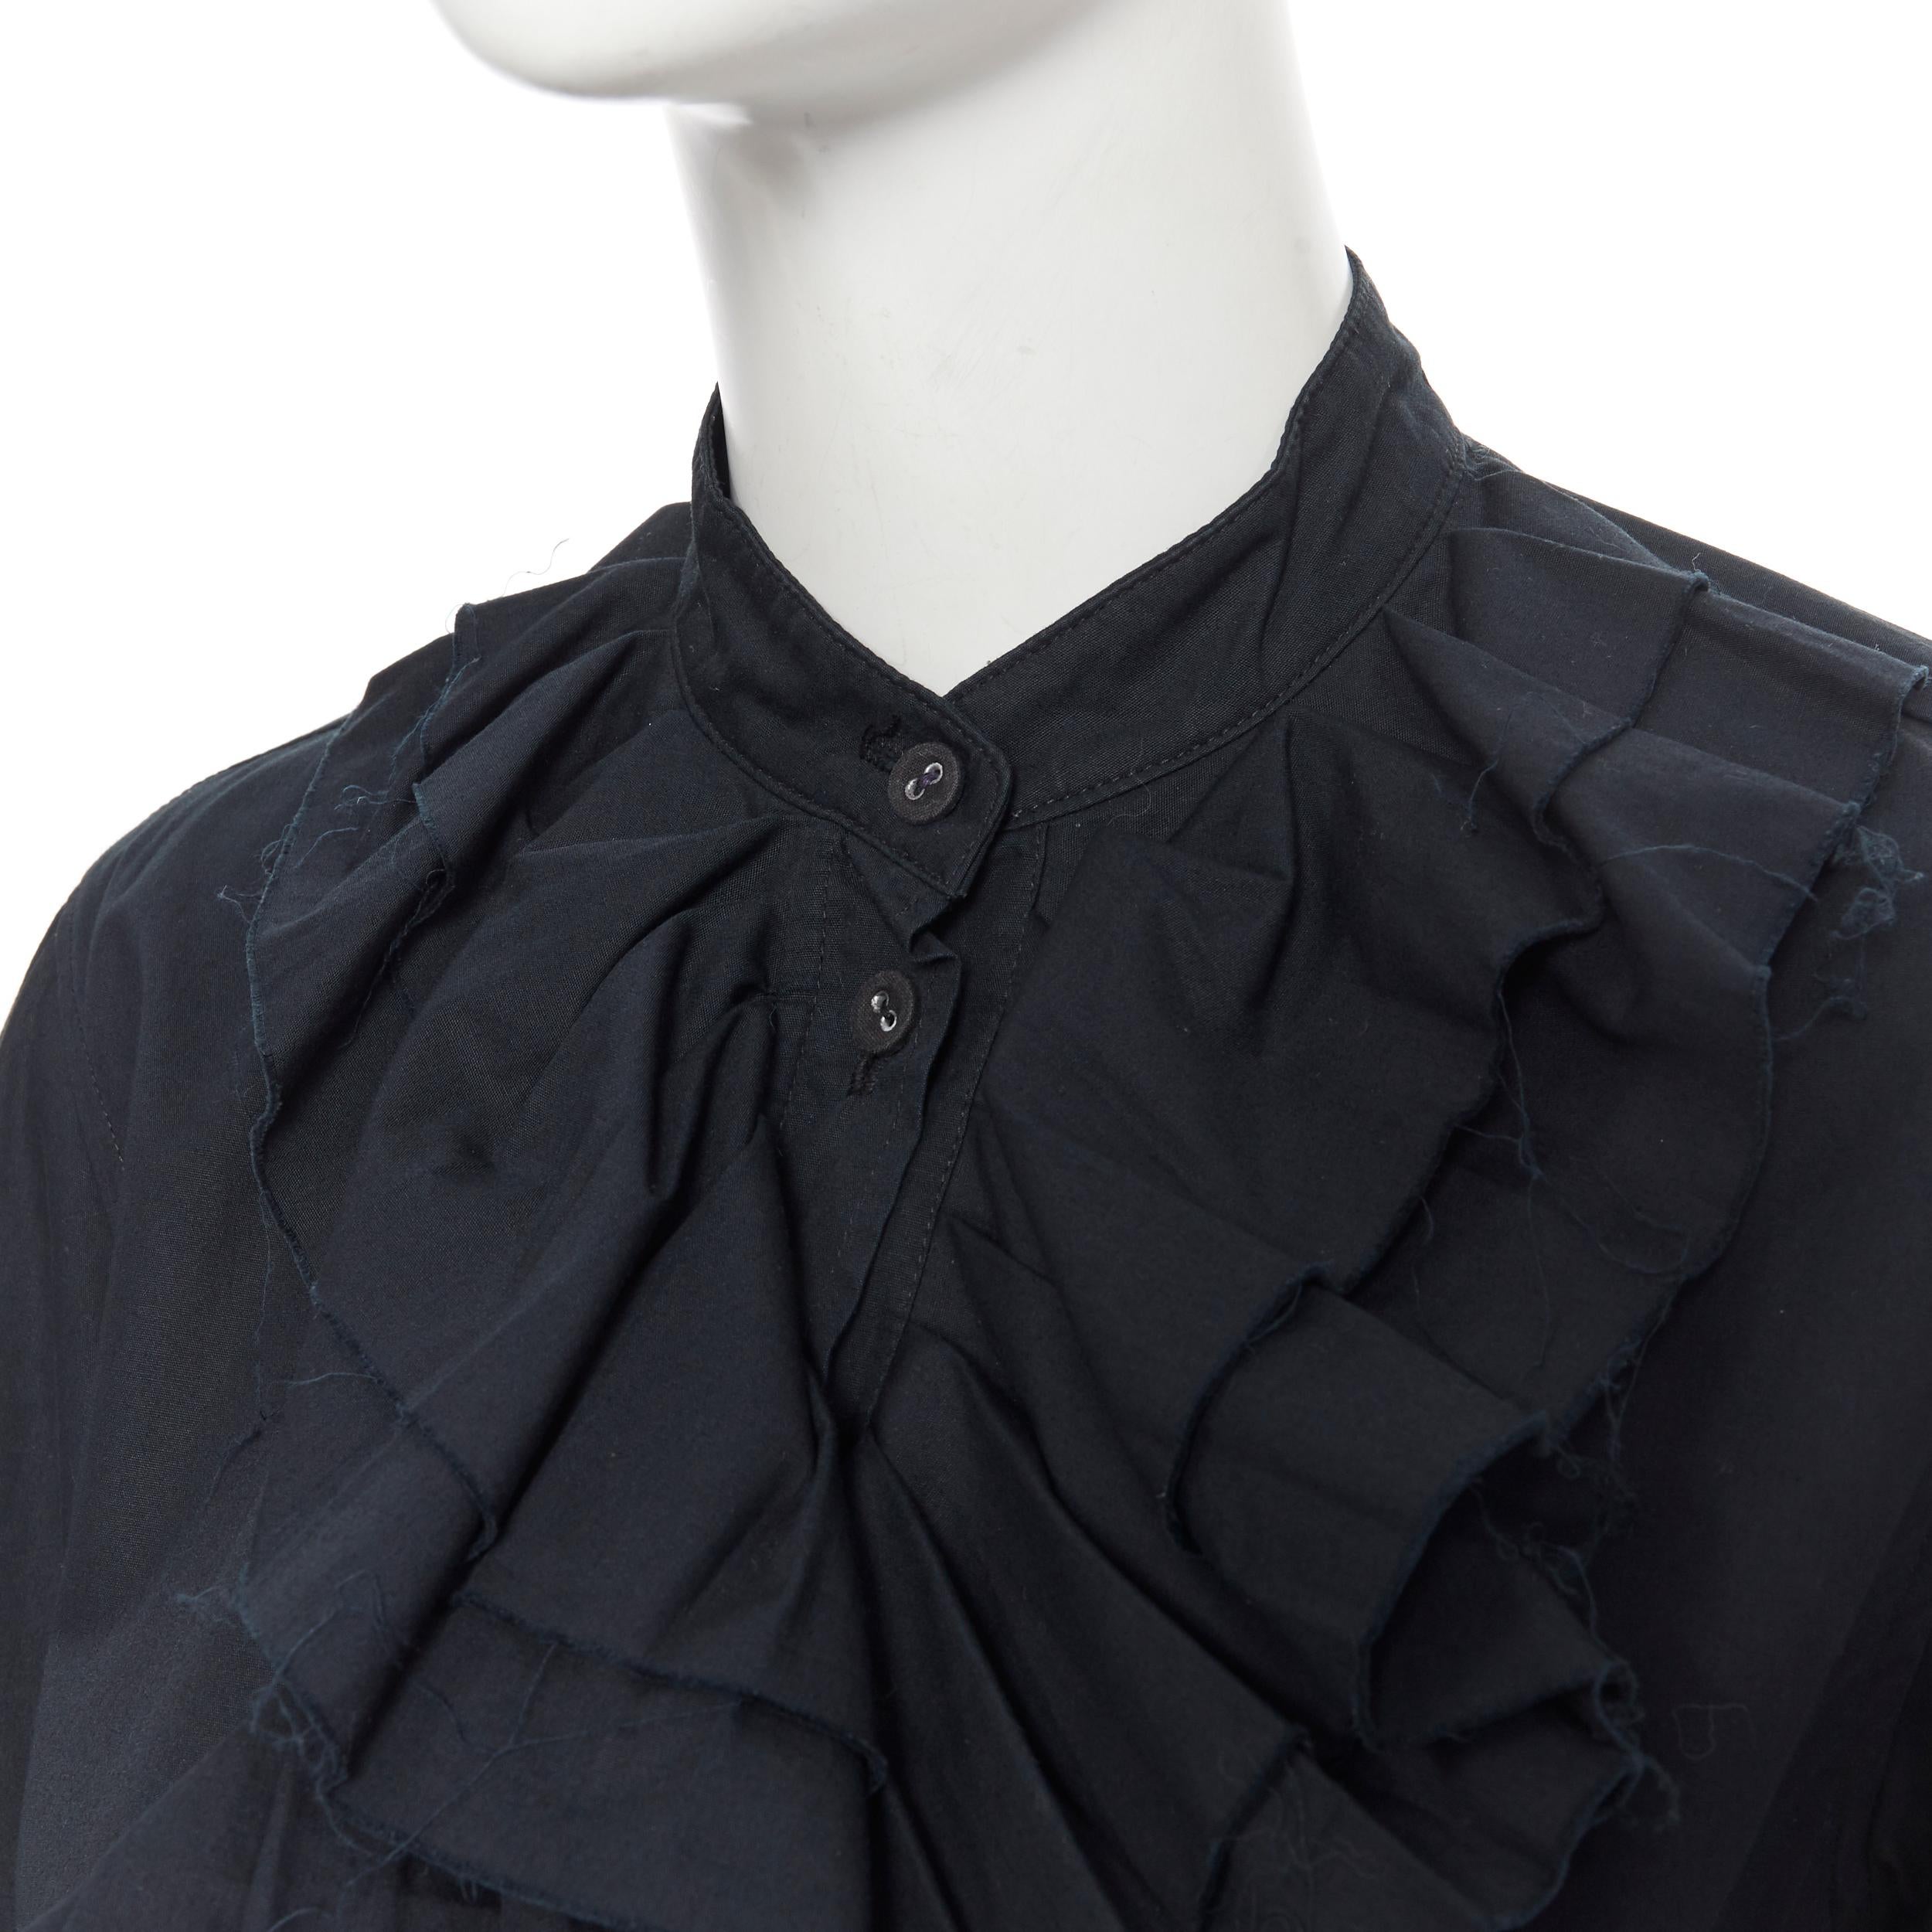 JENS LAUGESEN dark green black Victorian ruffle collar long sleeve shirt UK10 
Reference: CRTI/A00251 
Brand: Jens Laugesen 
Designer: Jens Laugesen 
Material: Cotton 
Color: Black 
Pattern: Solid 
Closure: Button 
Made in: United Kingdom